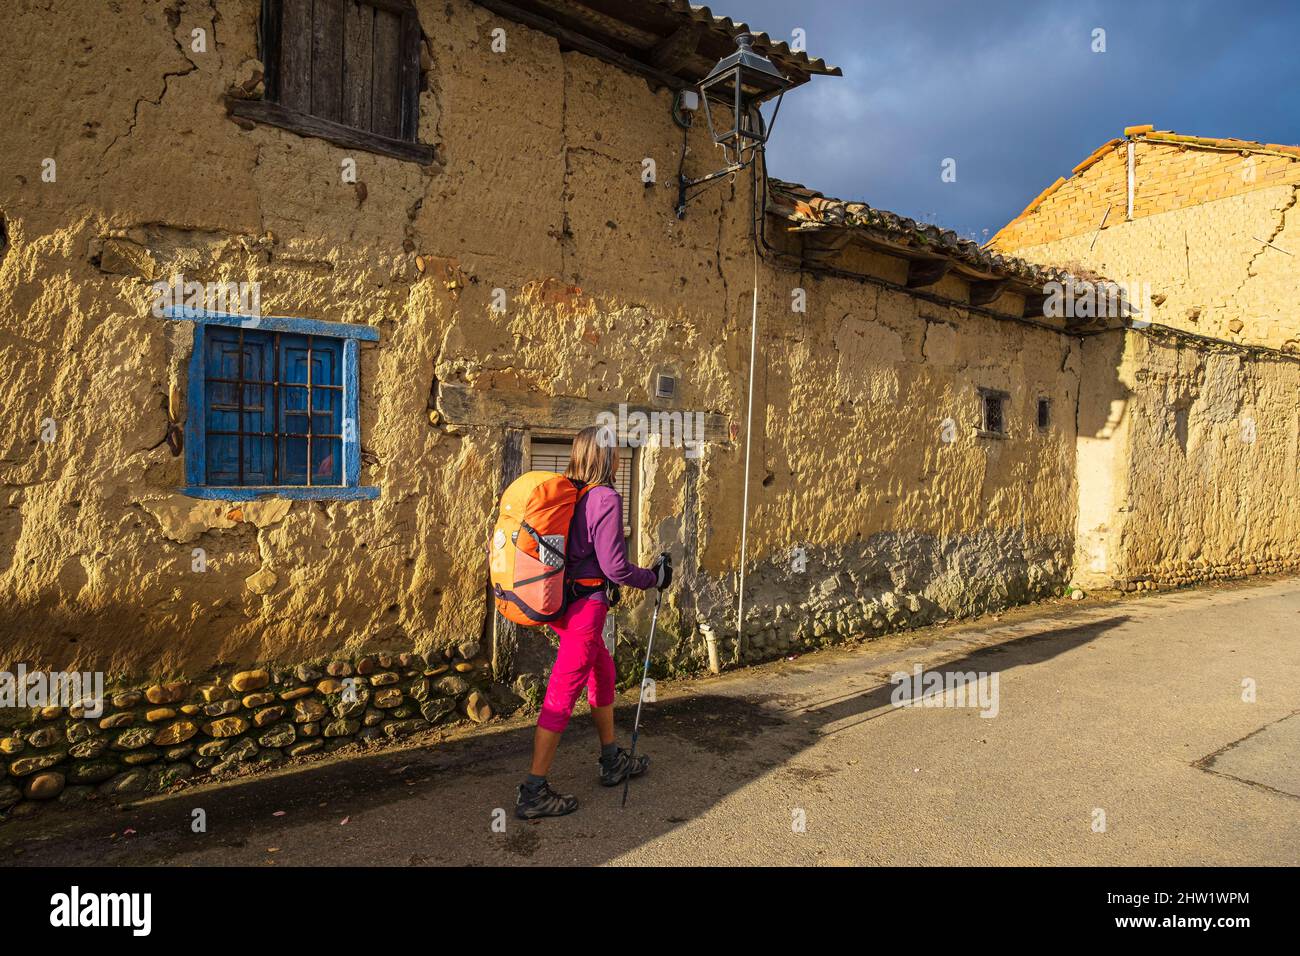 Spain, Castile and Le?n, Villares de Orbigo, hike on the Camino Franc?s, Spanish route of the pilgrimage to Santiago de Compostela, listed as a UNESCO World Heritage Site Stock Photo